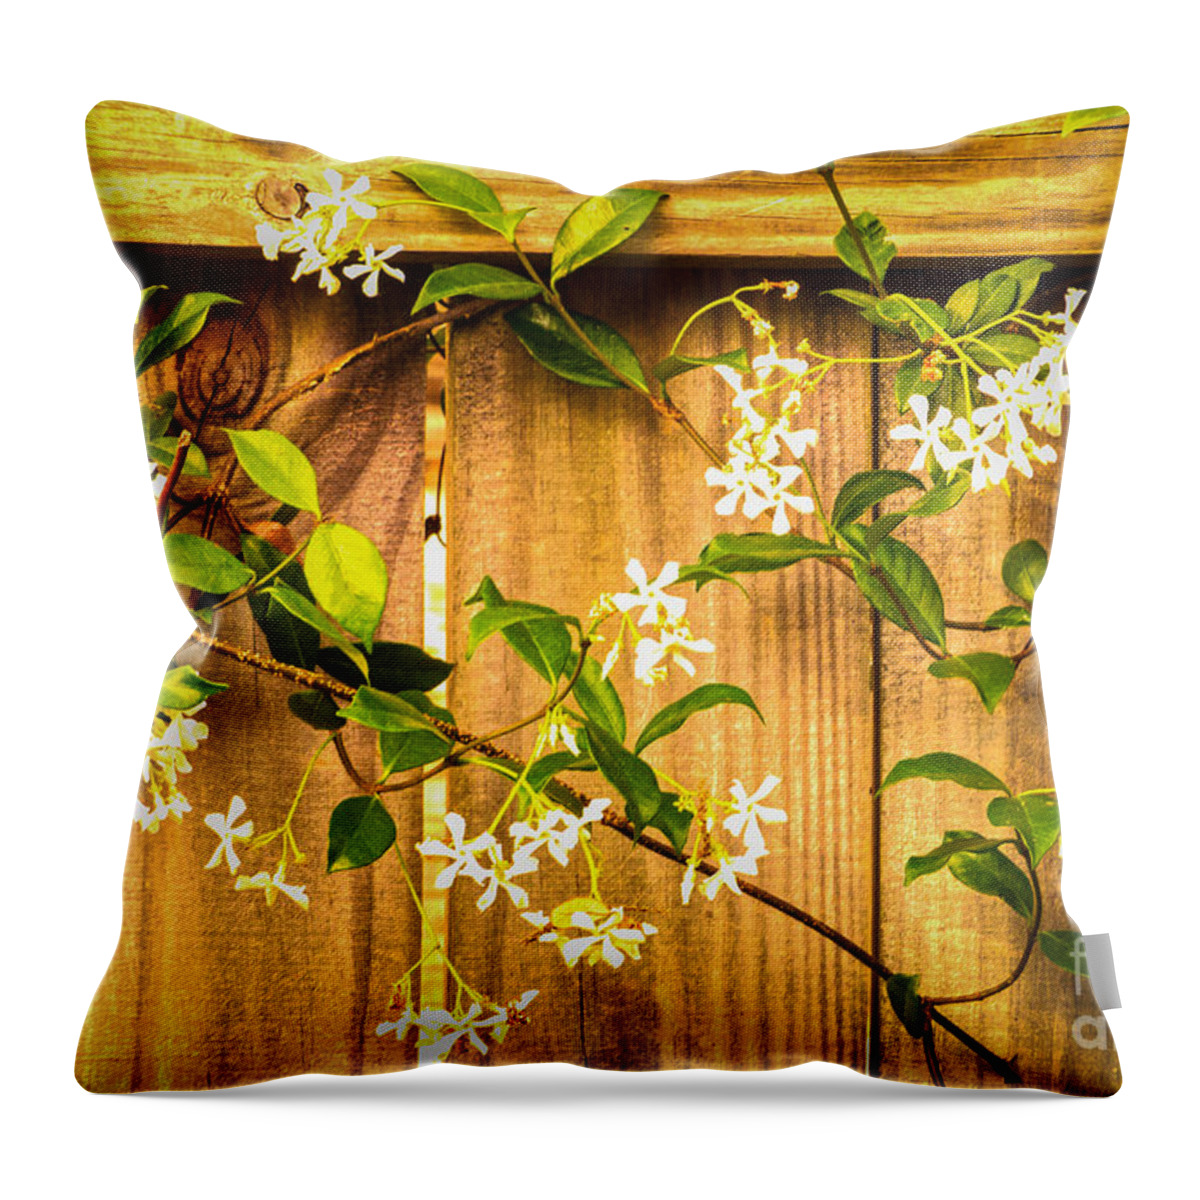 Bob And Nancy Kendrick Throw Pillow featuring the photograph Fragrant Jasmine by Bob and Nancy Kendrick